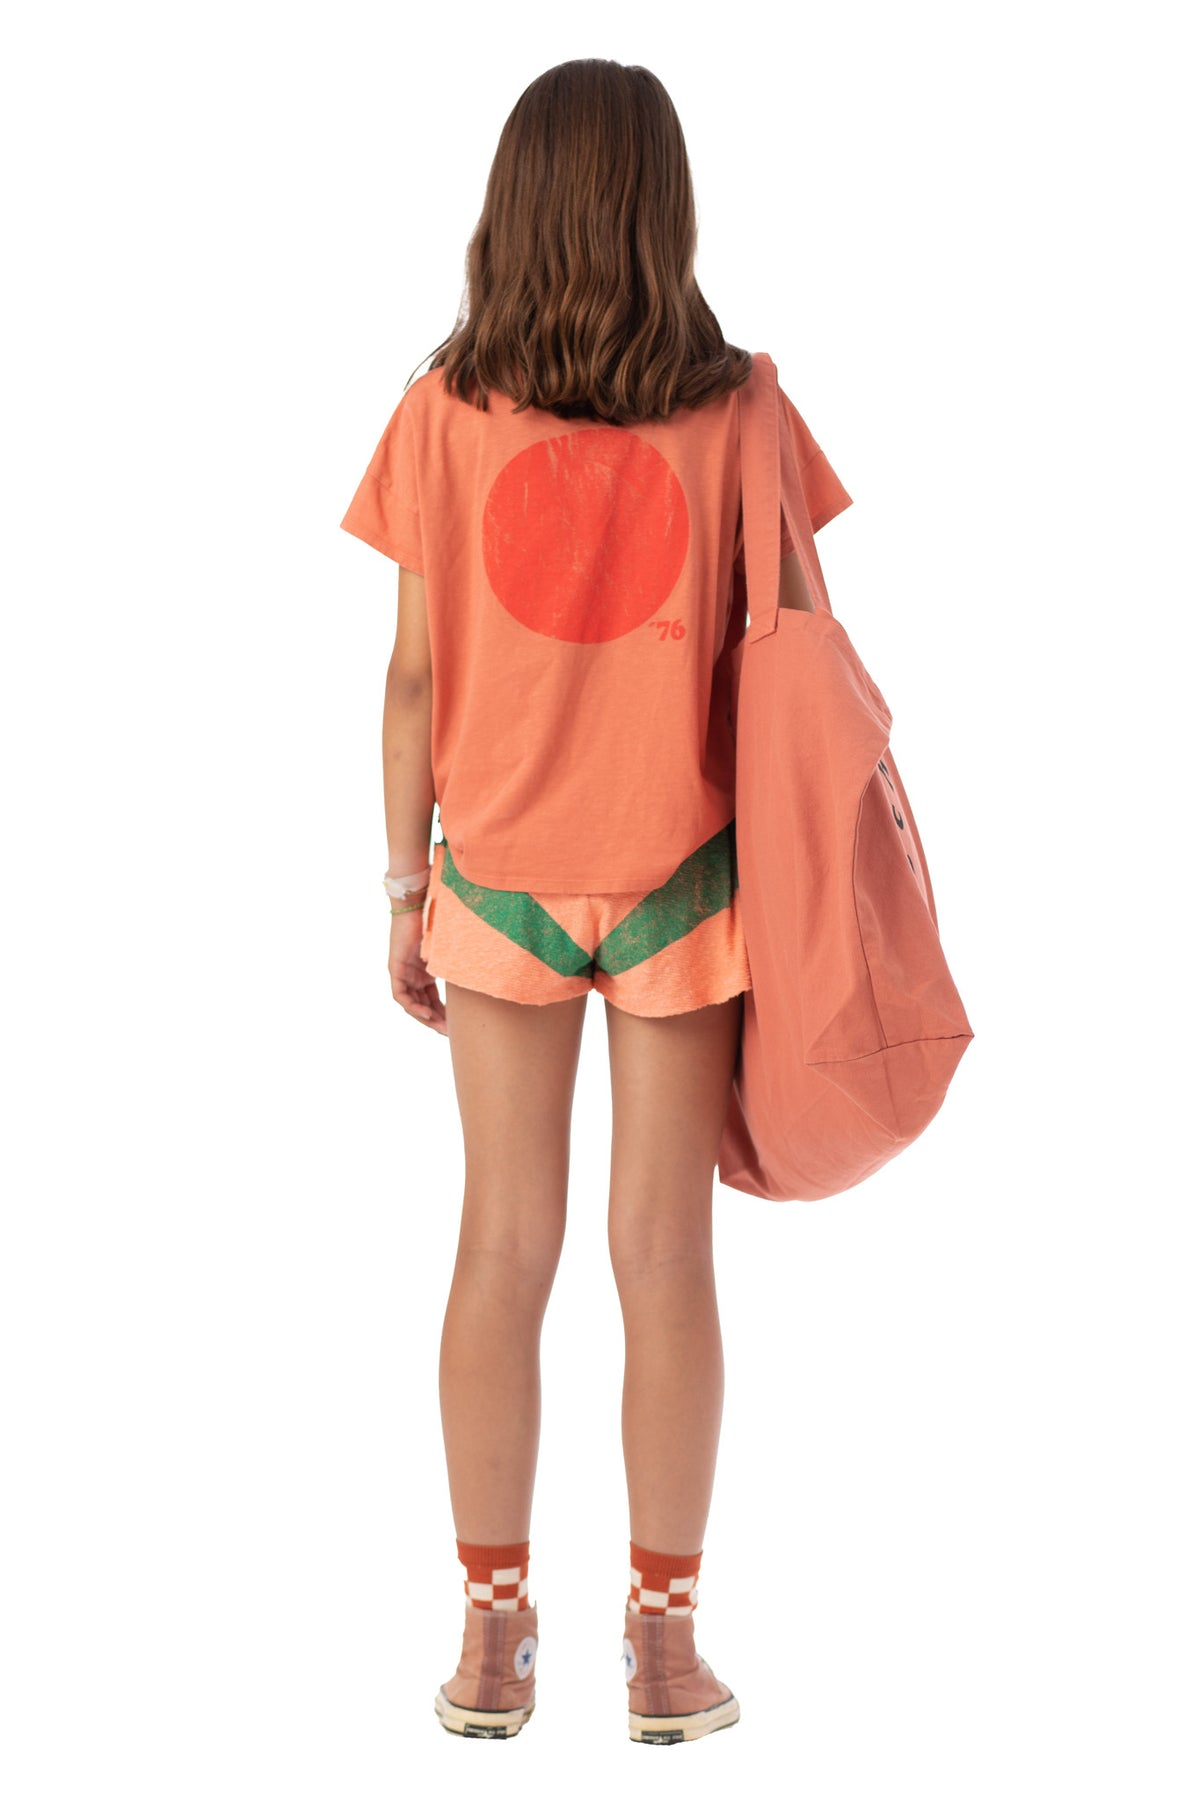 Terry shorts coral and green print, Piupiuchick